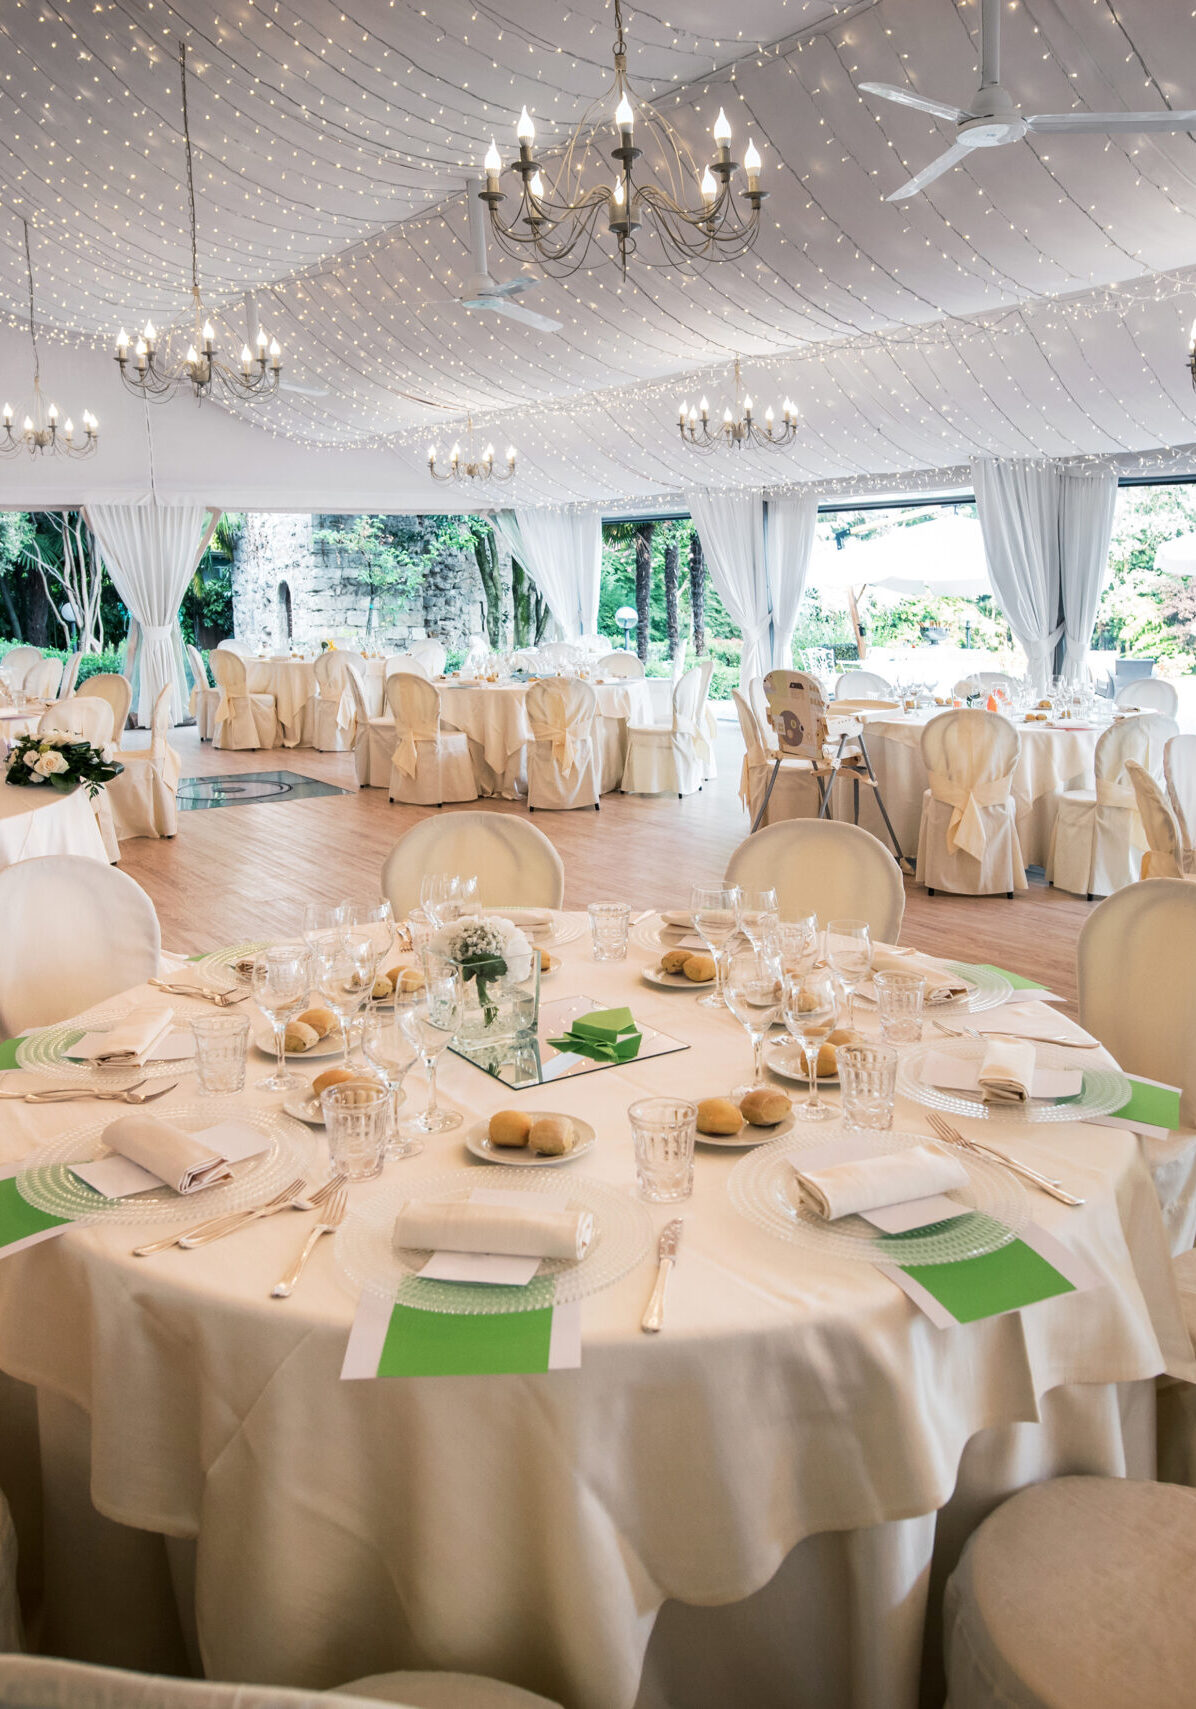 Wedding reception venue in a large marquis with elegant formal white table settings and a view of a garden